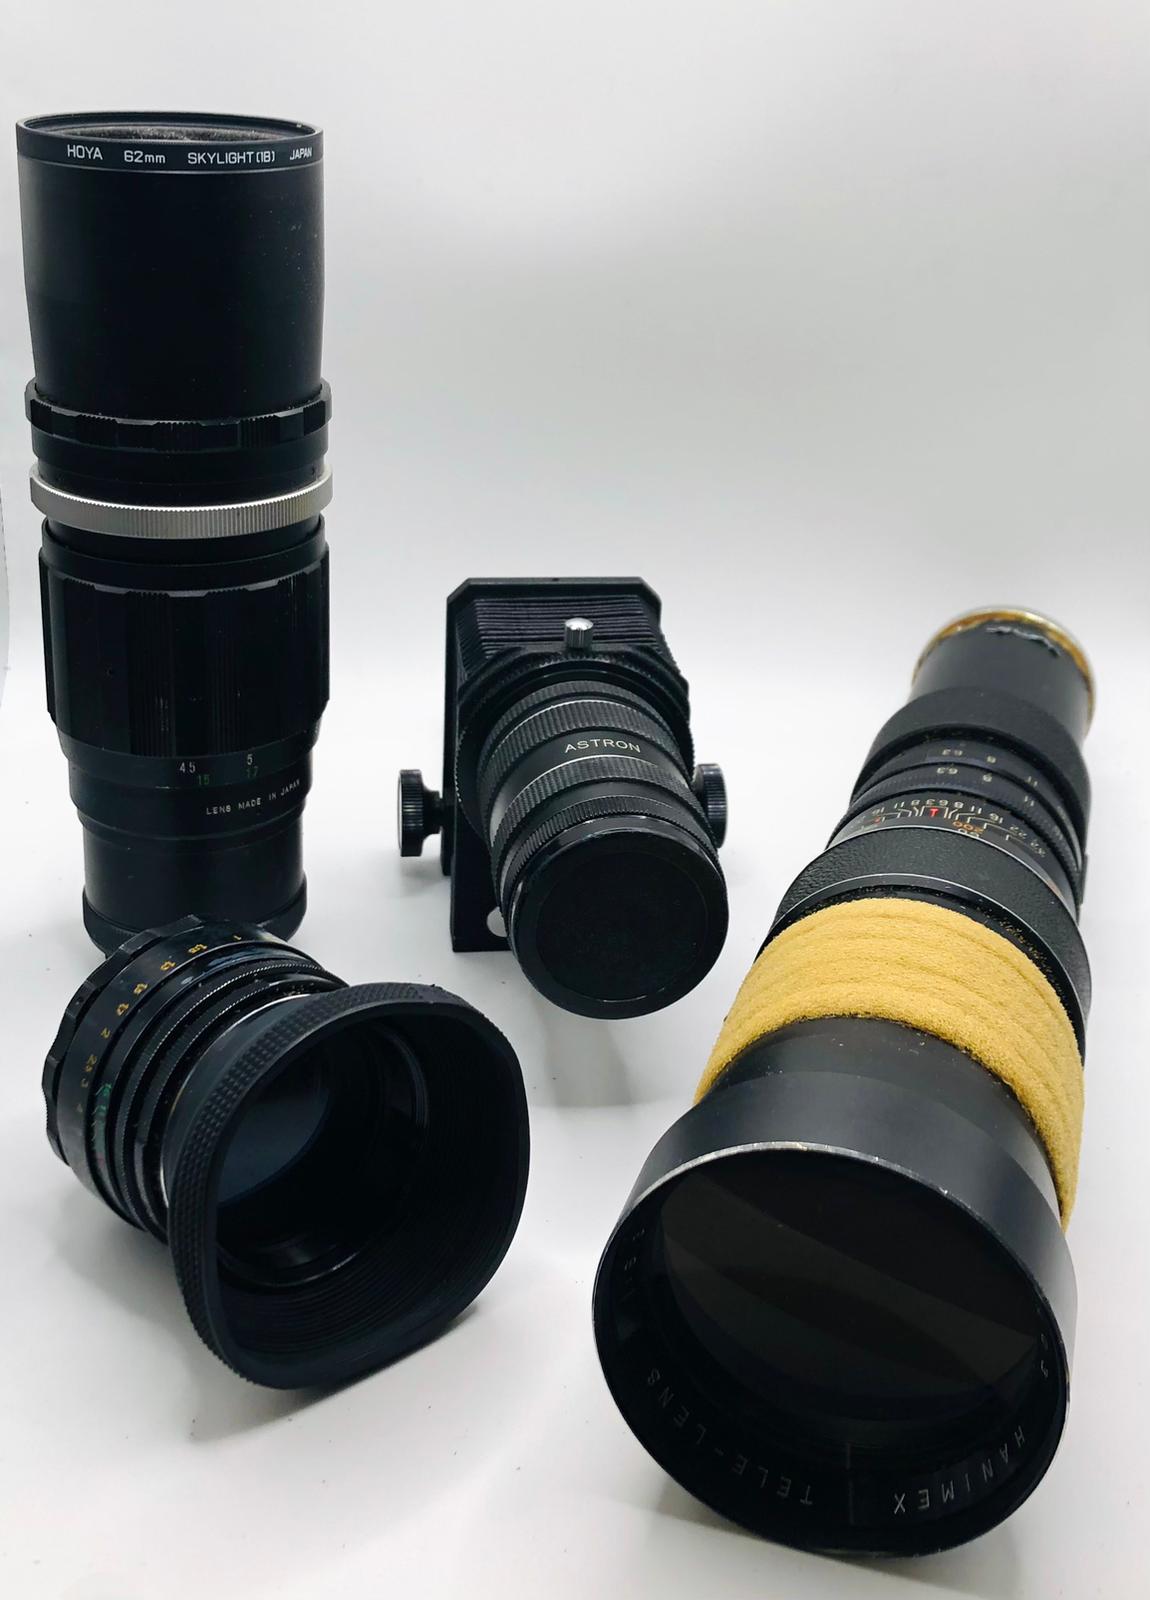 Job lot of Vintage Camera Lens with 2 cases - Hanimex 400mm, soligor 250mm, Helios 44-2, Astron Ma..